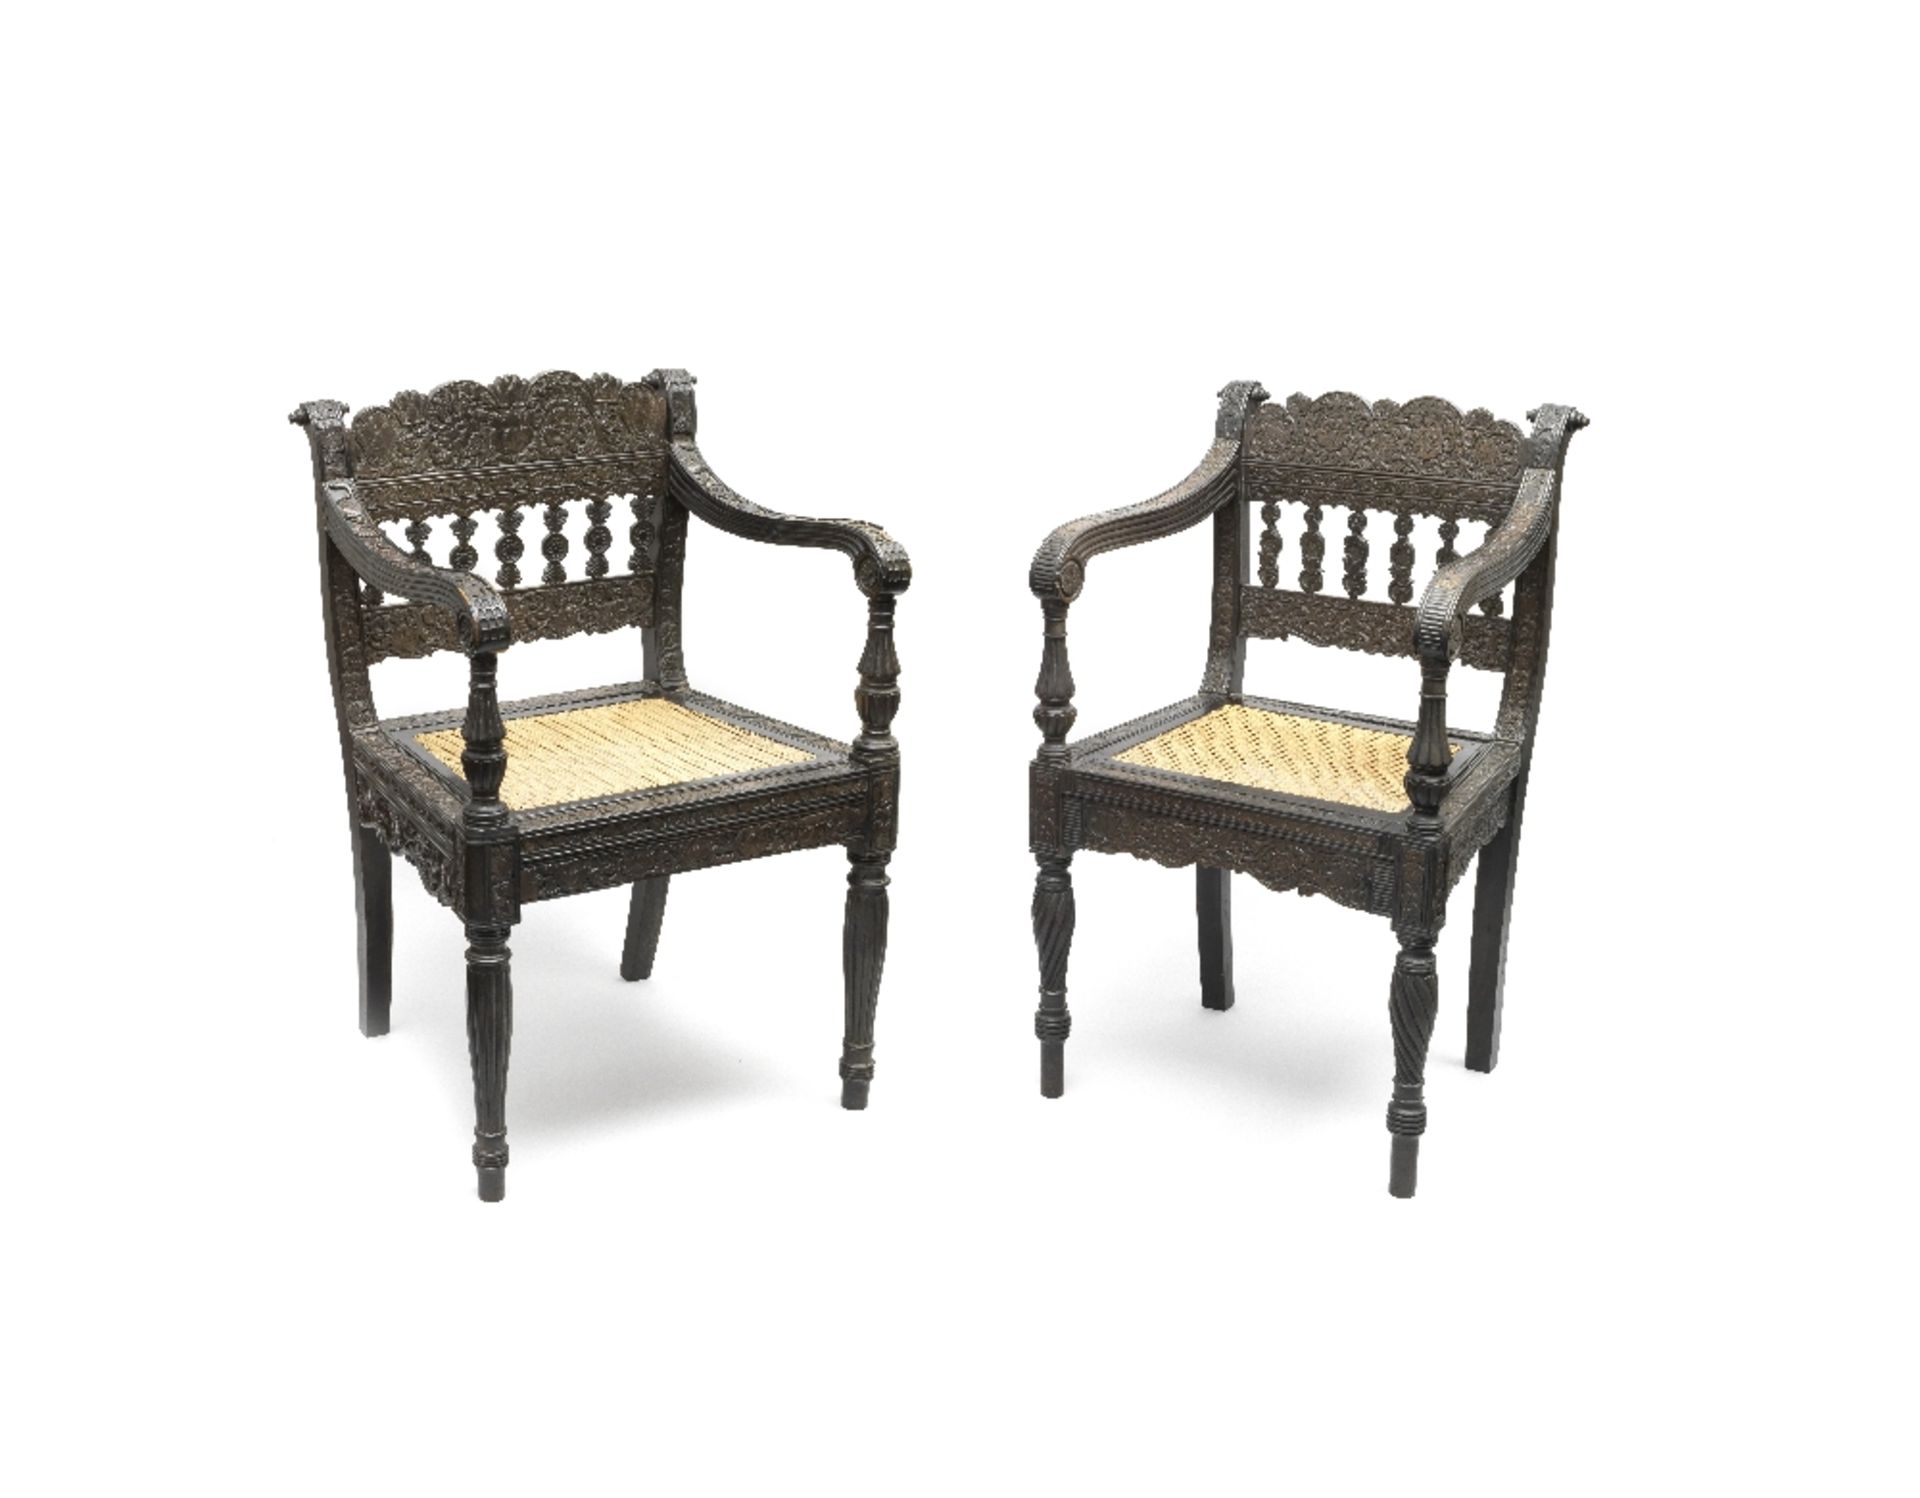 Two carved ebony chairs Ceylon, 1820-25, incorporating panels from the Coromandel Coast or Ceylo...